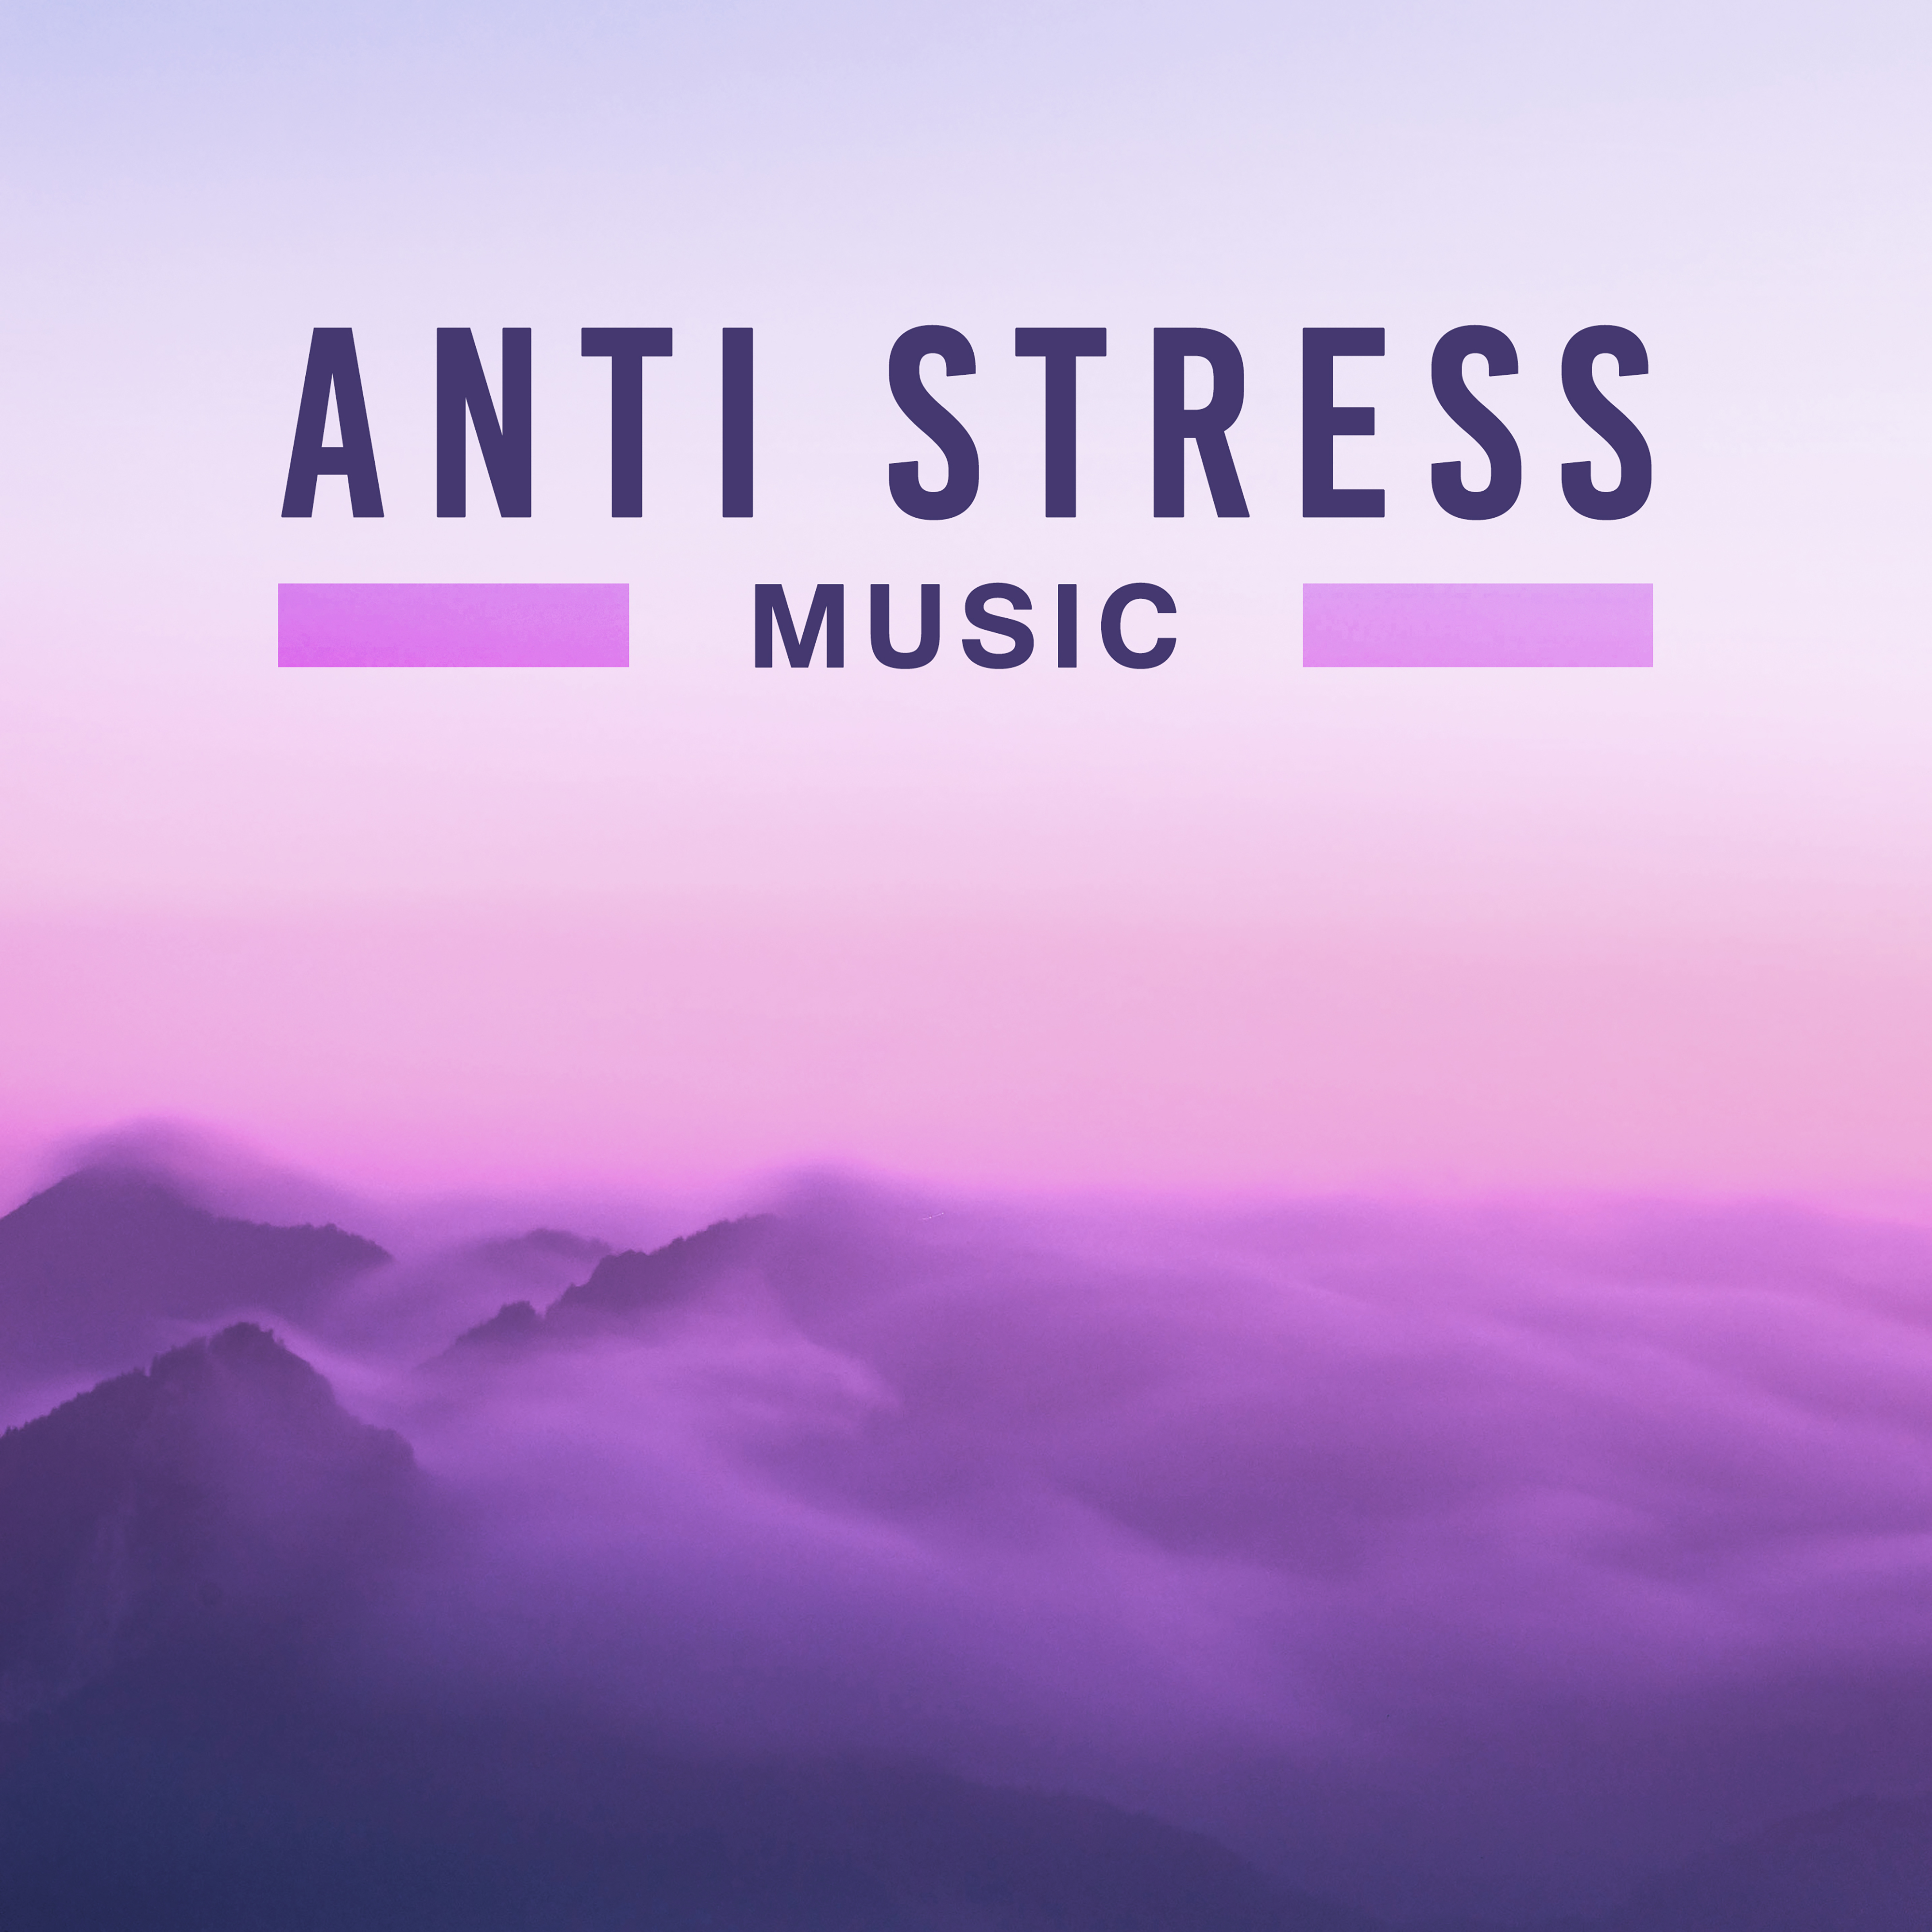 Anti Stress Music – Nature Sounds for Relaxation, Ocean Dreams, Relief, Calming Melodies to Rest, Singing Birds, Relaxing Waves for Sleep